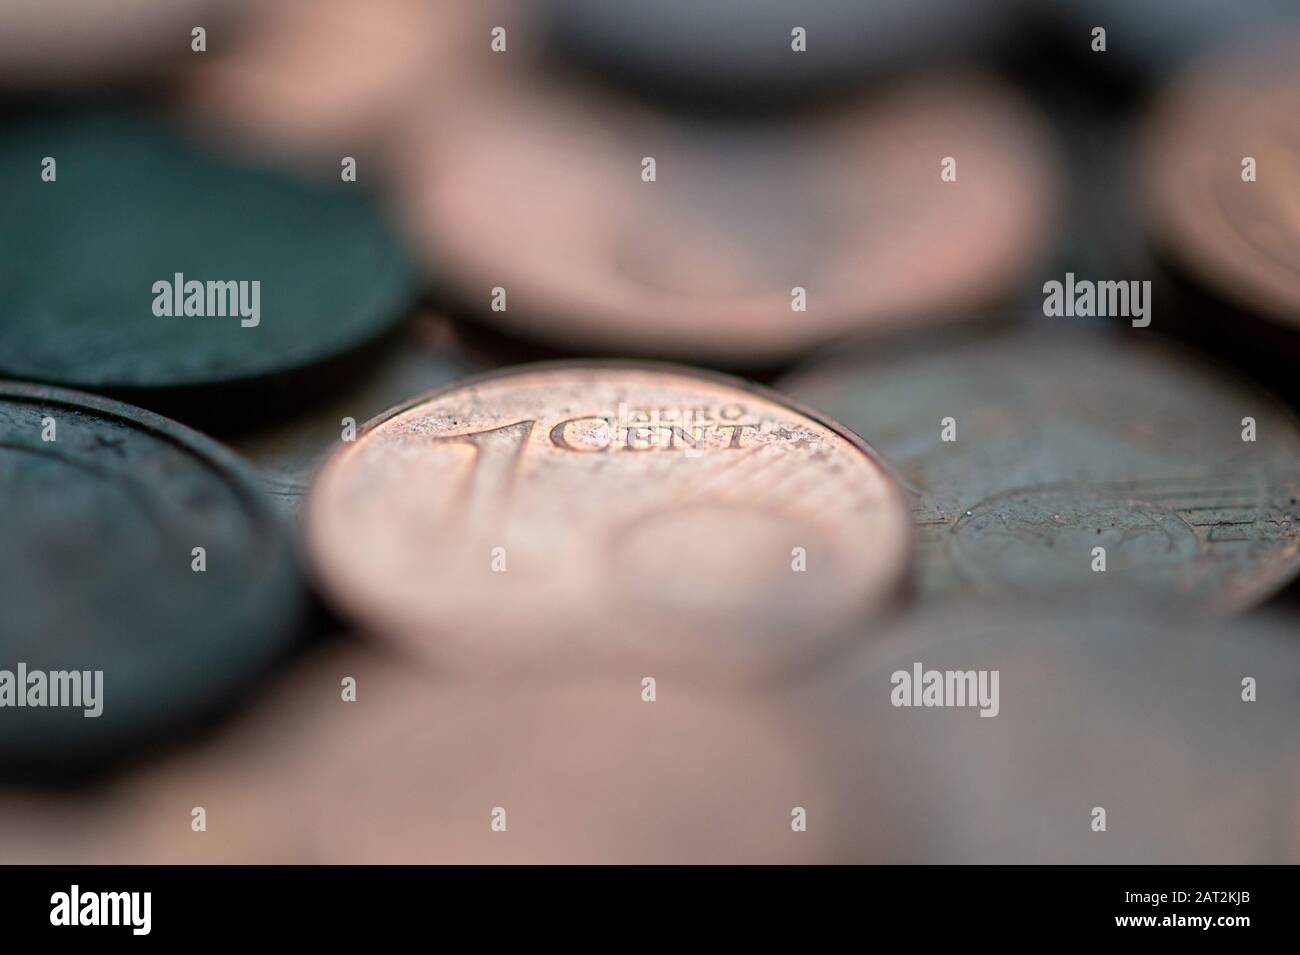 Magdeburg, Germany. 29th Jan, 2020. Euro cent coins lie on top of each other on a table. Credit: Klaus-Dietmar Gabbert/dpa-Zentralbild/ZB/dpa/Alamy Live News Stock Photo